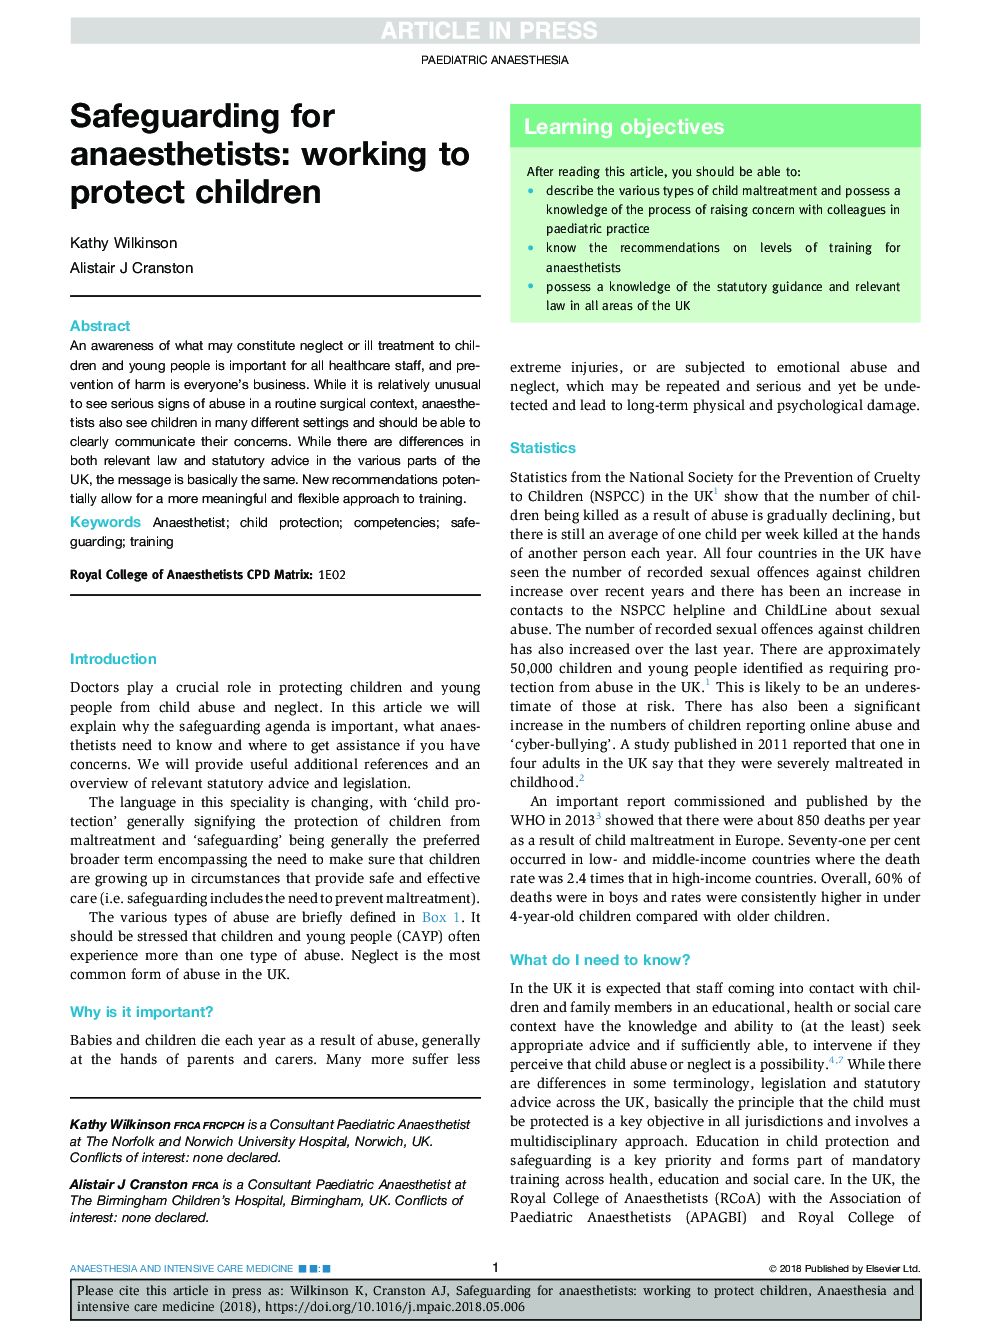 Safeguarding for anaesthetists: working to protect children